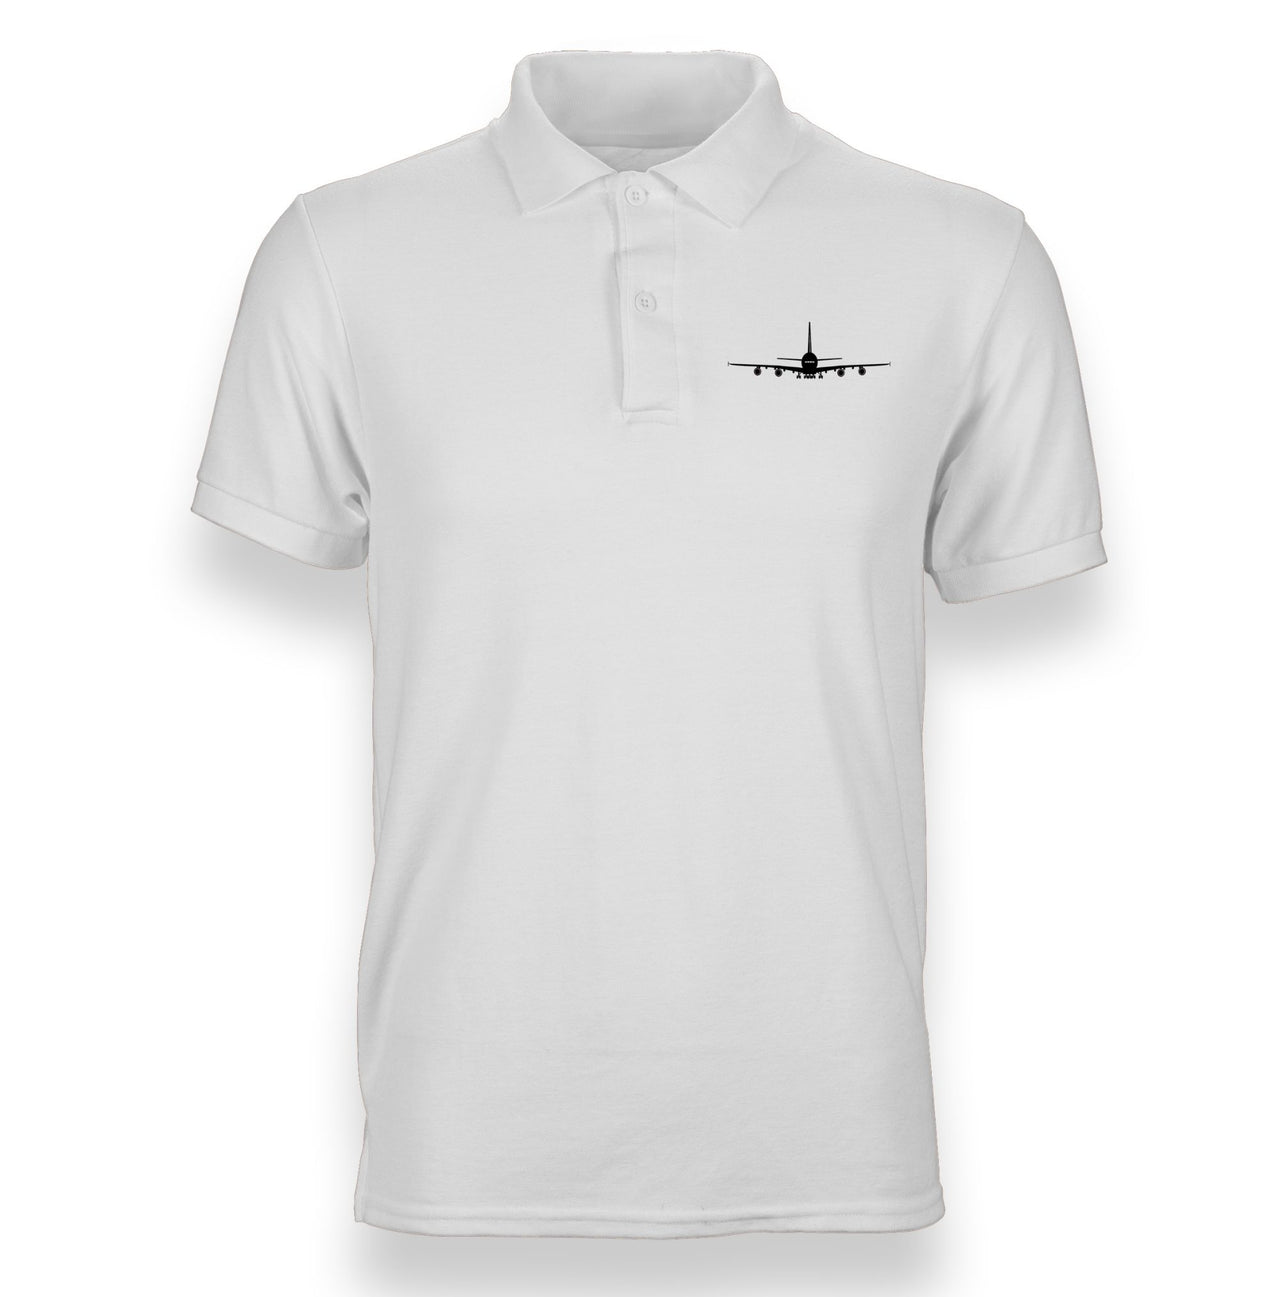 Airbus A380 Silhouette Designed "WOMEN" Polo T-Shirts